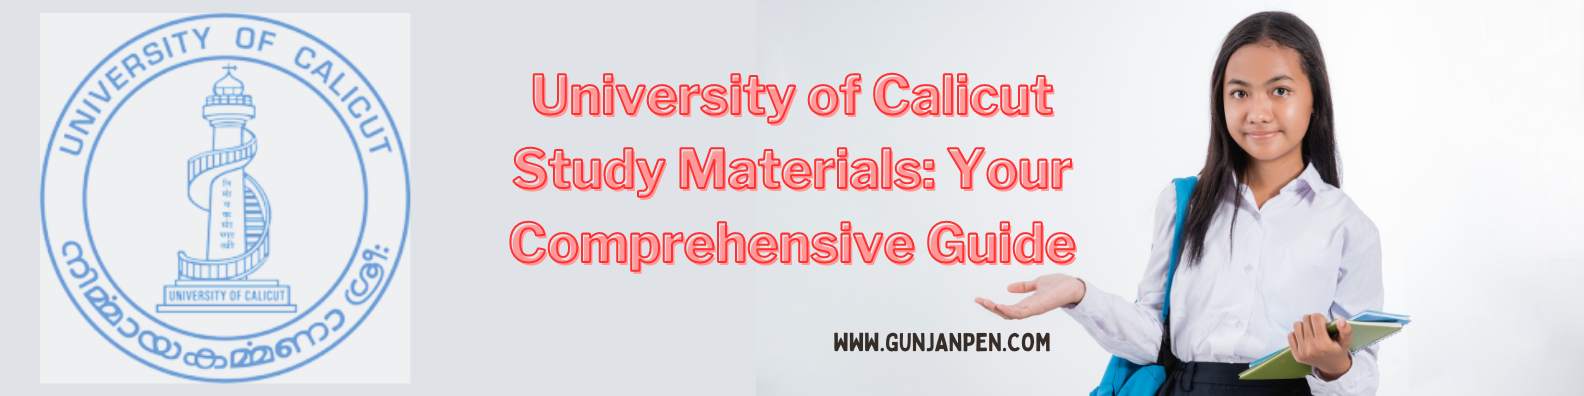 Exploring the University of Calicut Study Materials: Your Comprehensive Guide